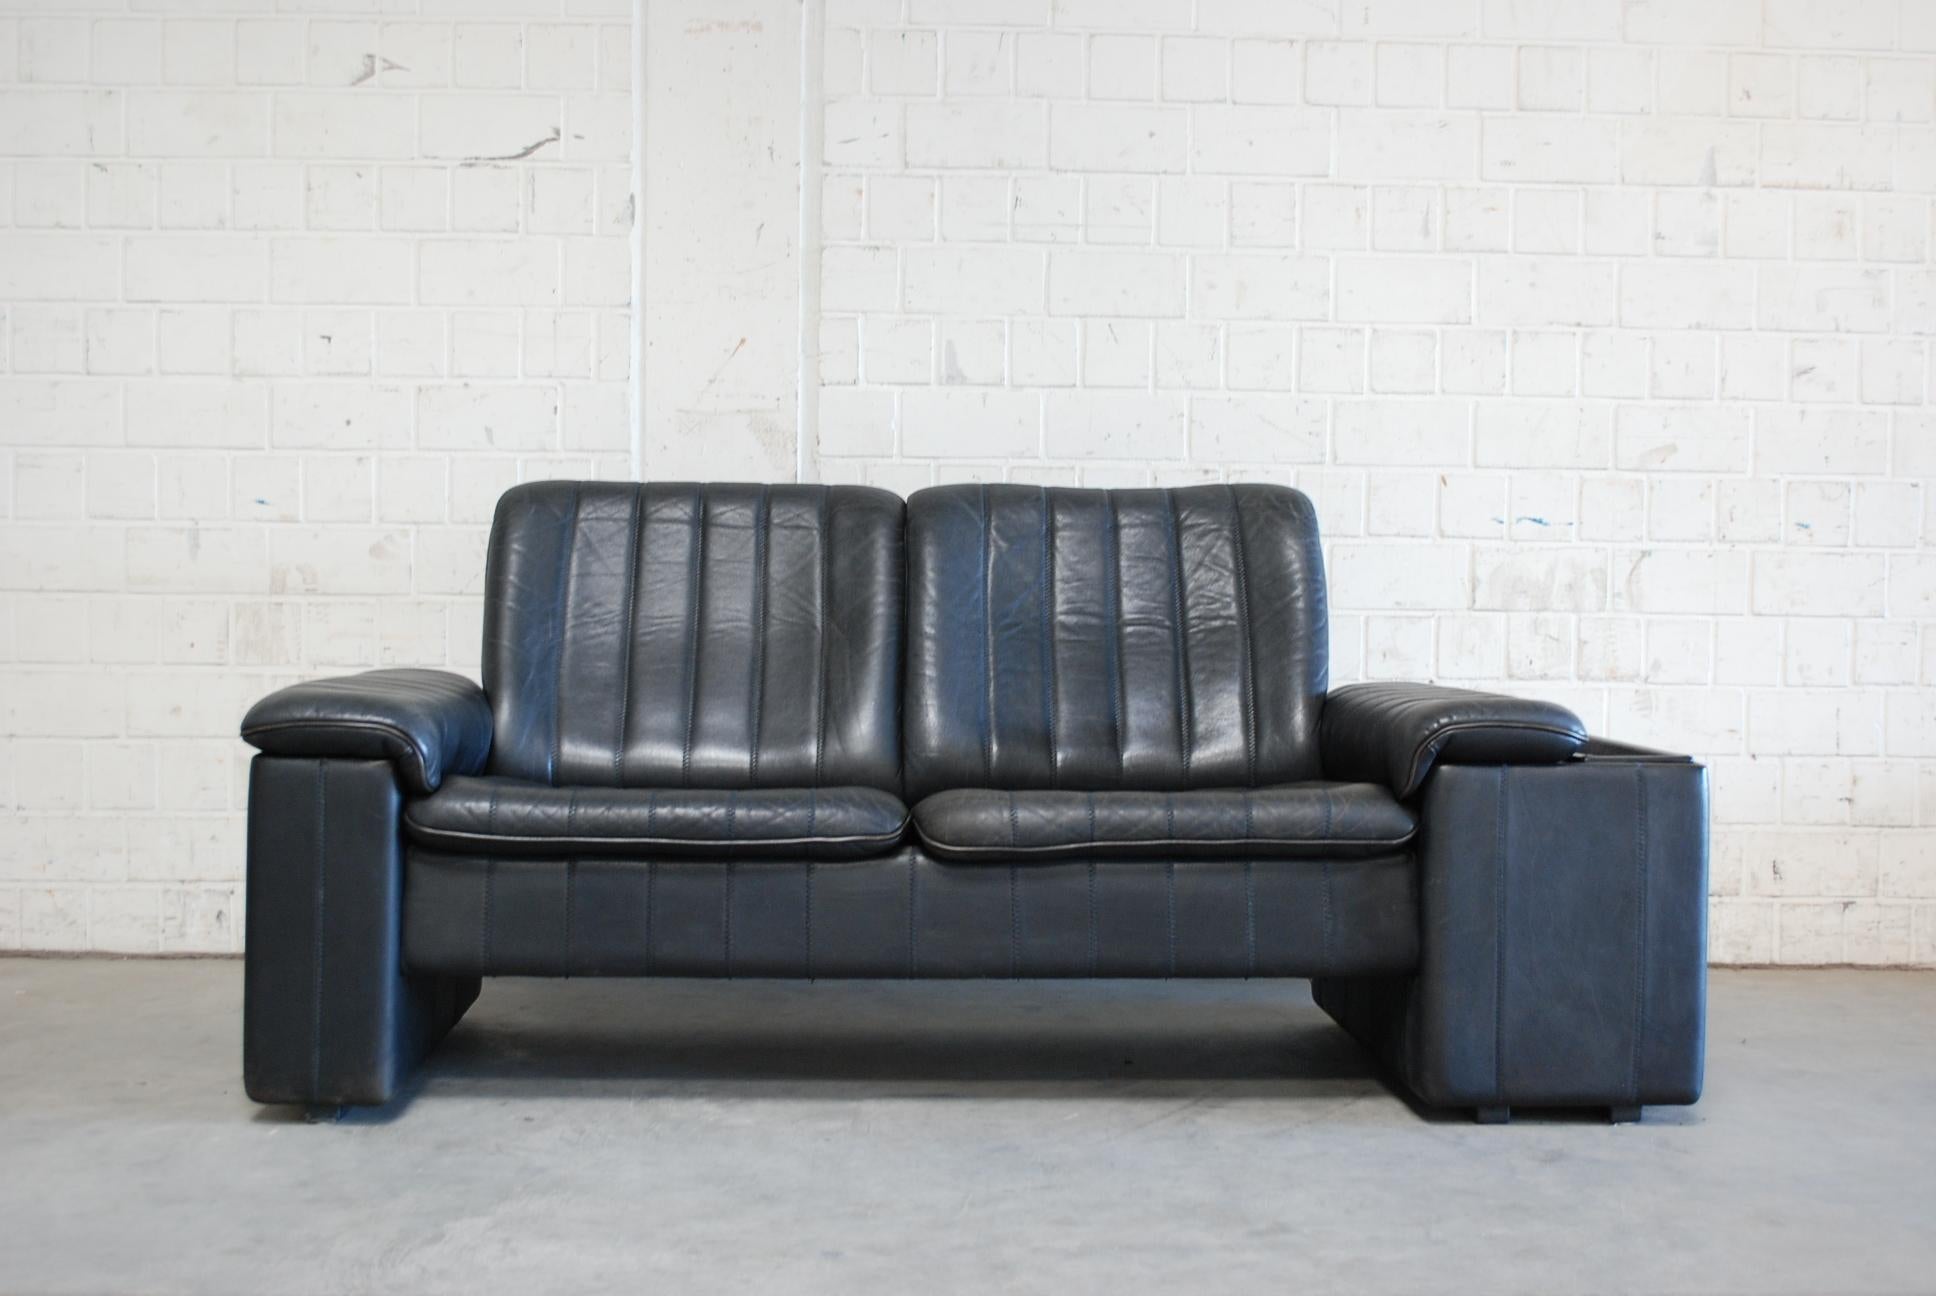 De Sede leather sofa in antracite color.
The sofa has on the left and right armrests a hidden tray folder.
Nice leather details with seam stitches. Design from the 1970s.
De Sede is known for best leather craftman quality from Switzerland.
 